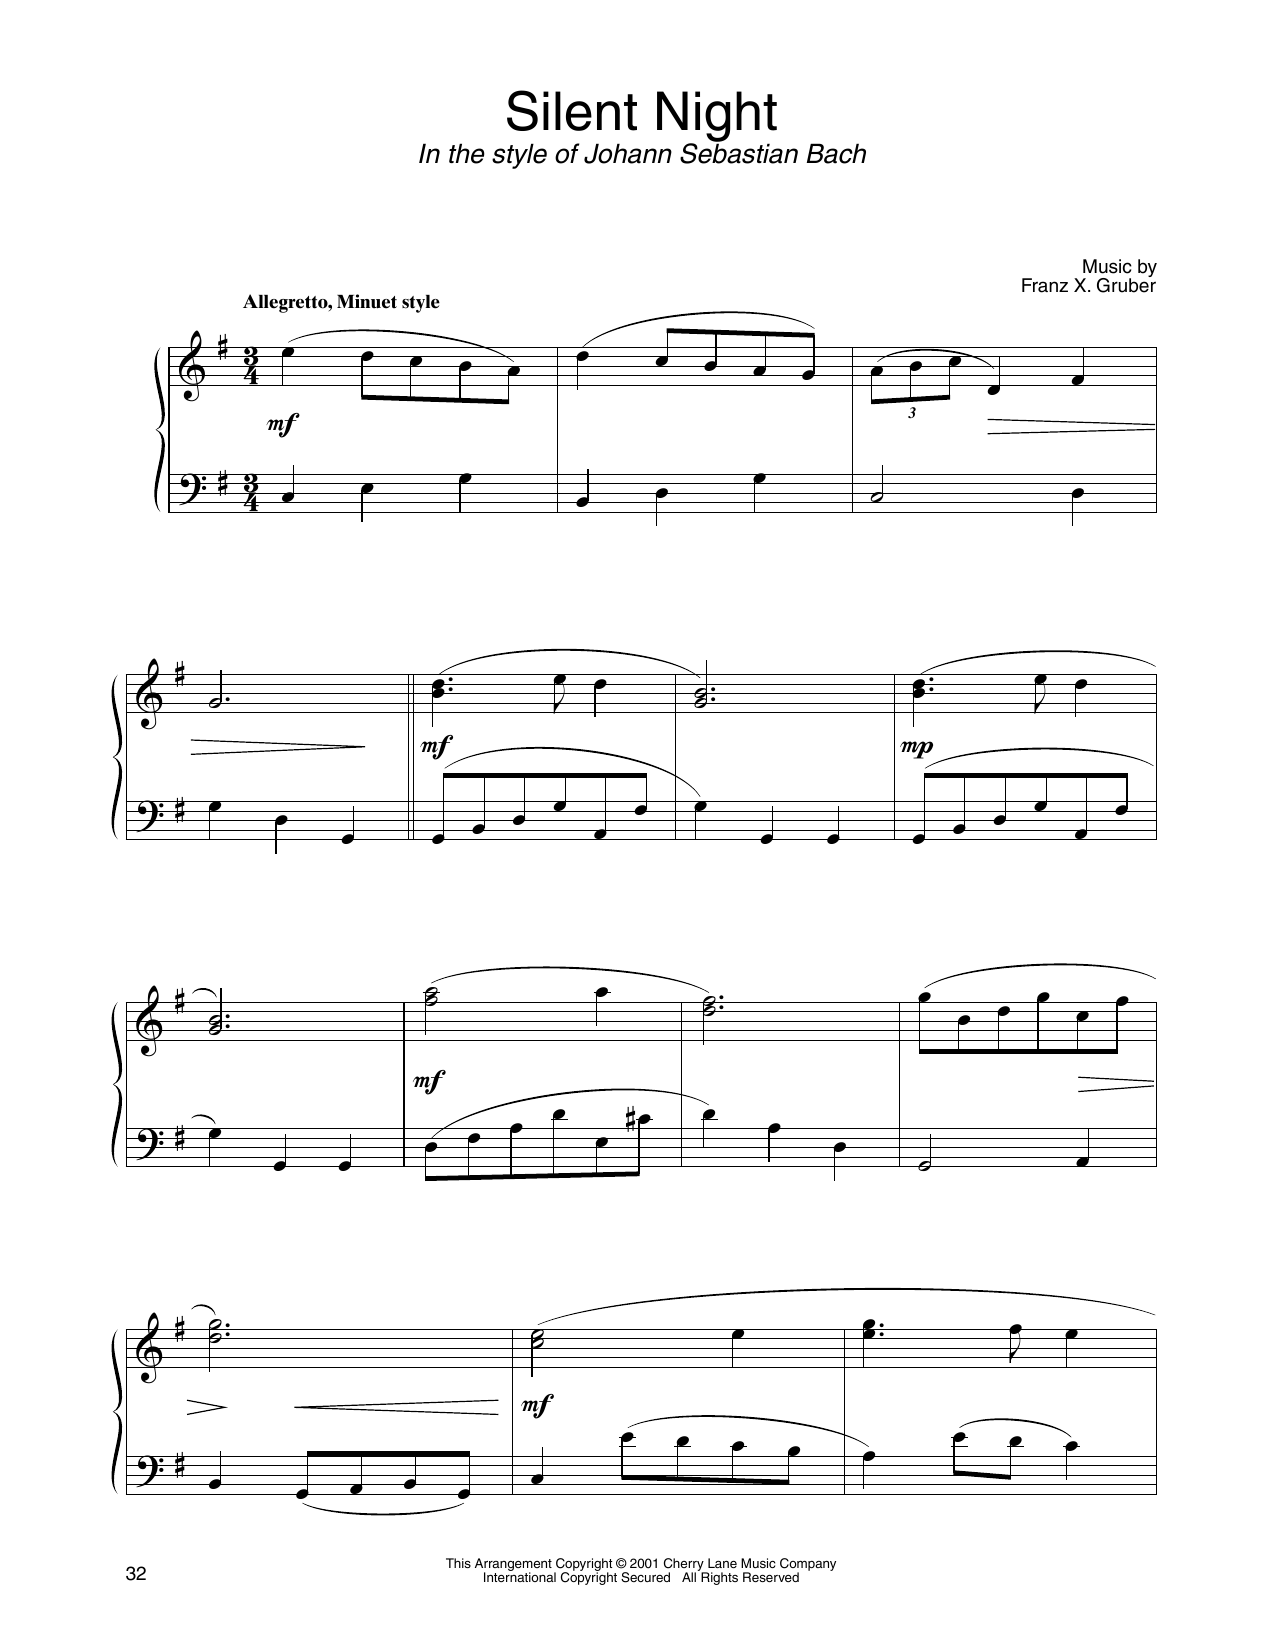 Download Franz X. Gruber Silent Night (in the style of J.S. Bach Sheet Music